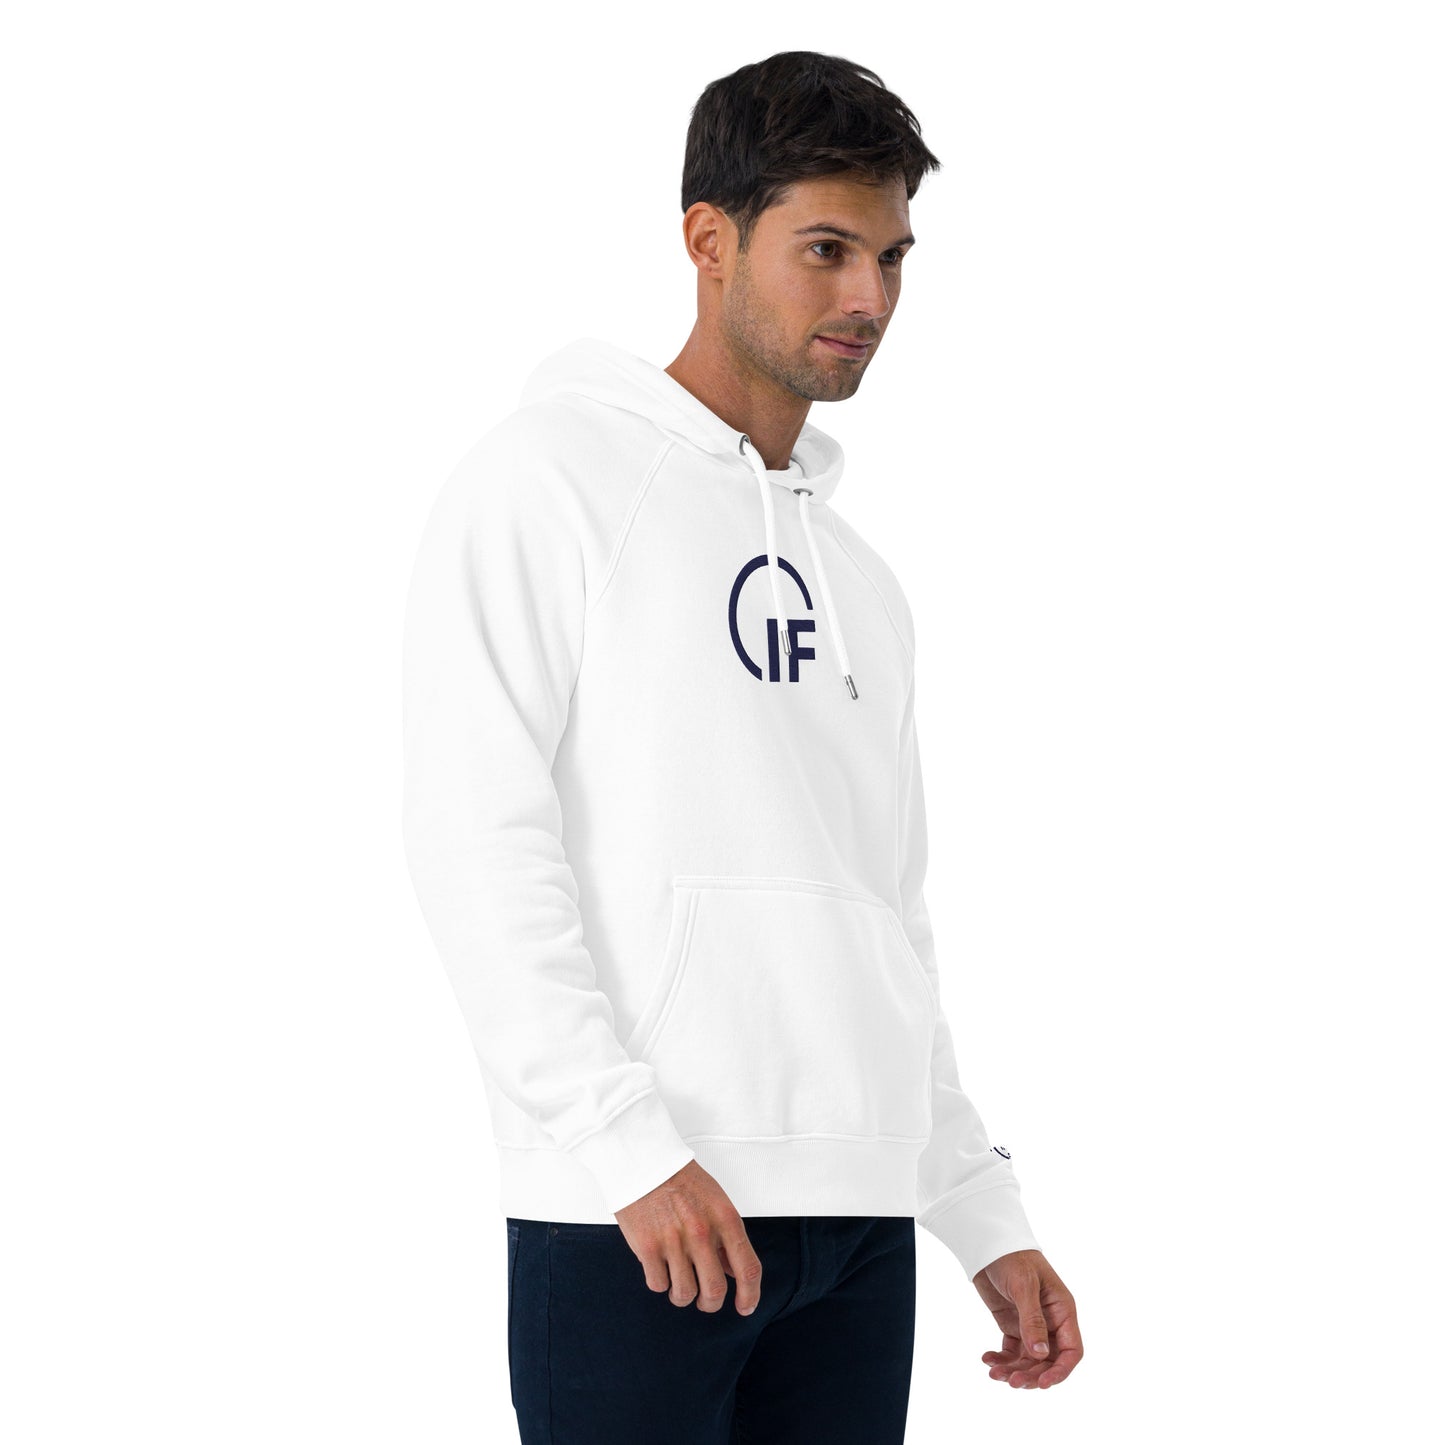 Embroidered Unisex eco raglan hoodie (Large Embroidered IF Chest Logo - Navy Thread)